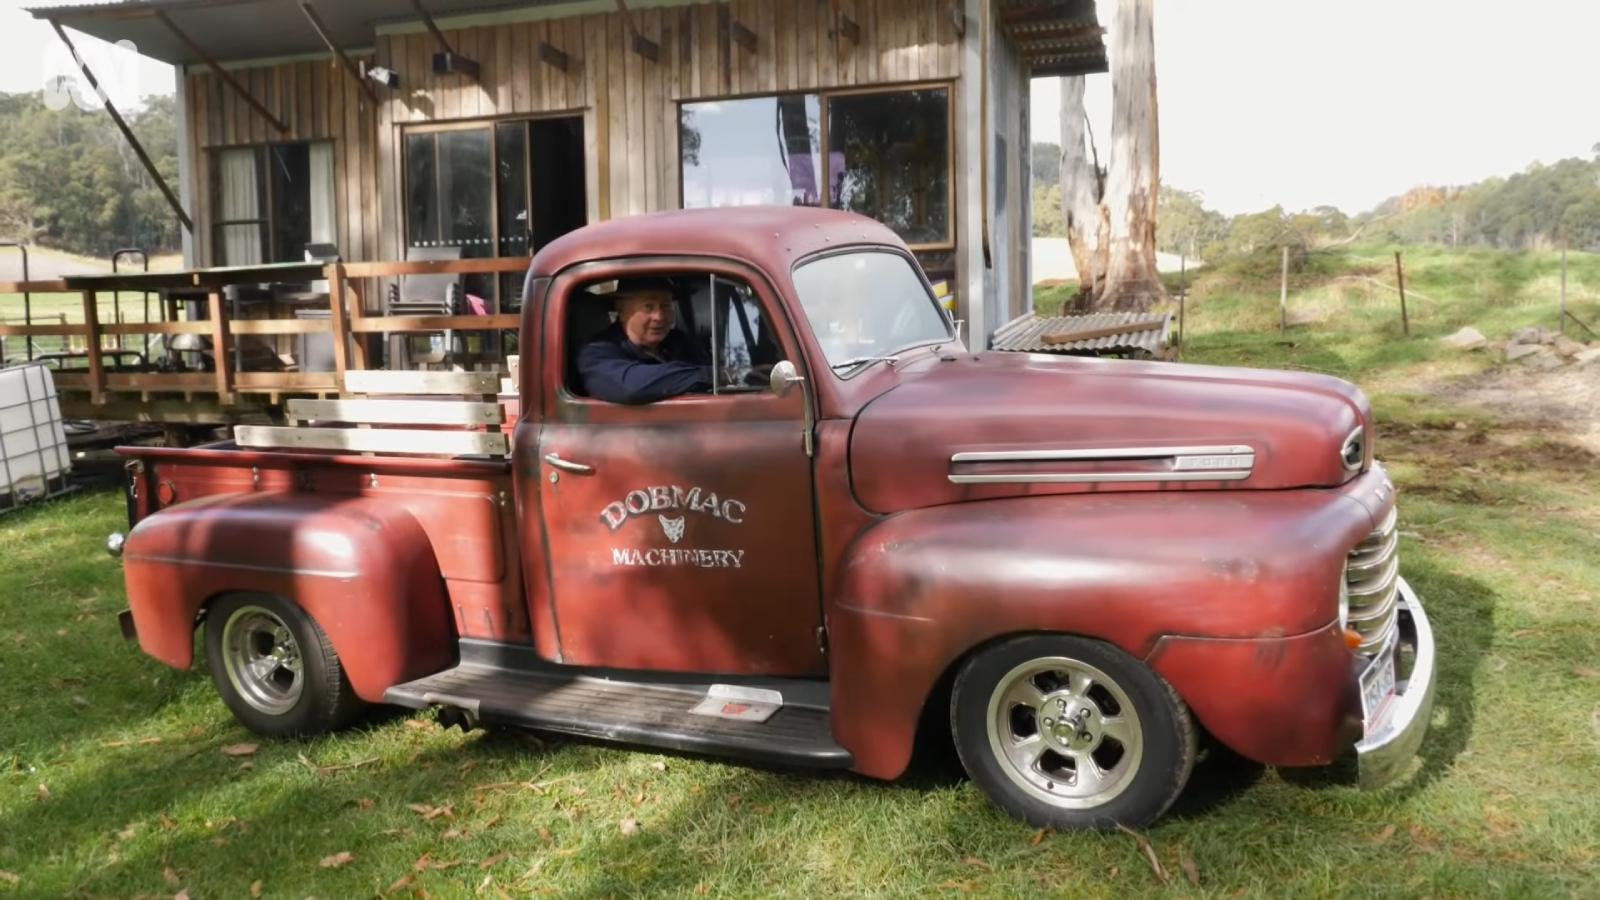 This 1948 Ford F1 pickup truck belongs to Phil Dobson